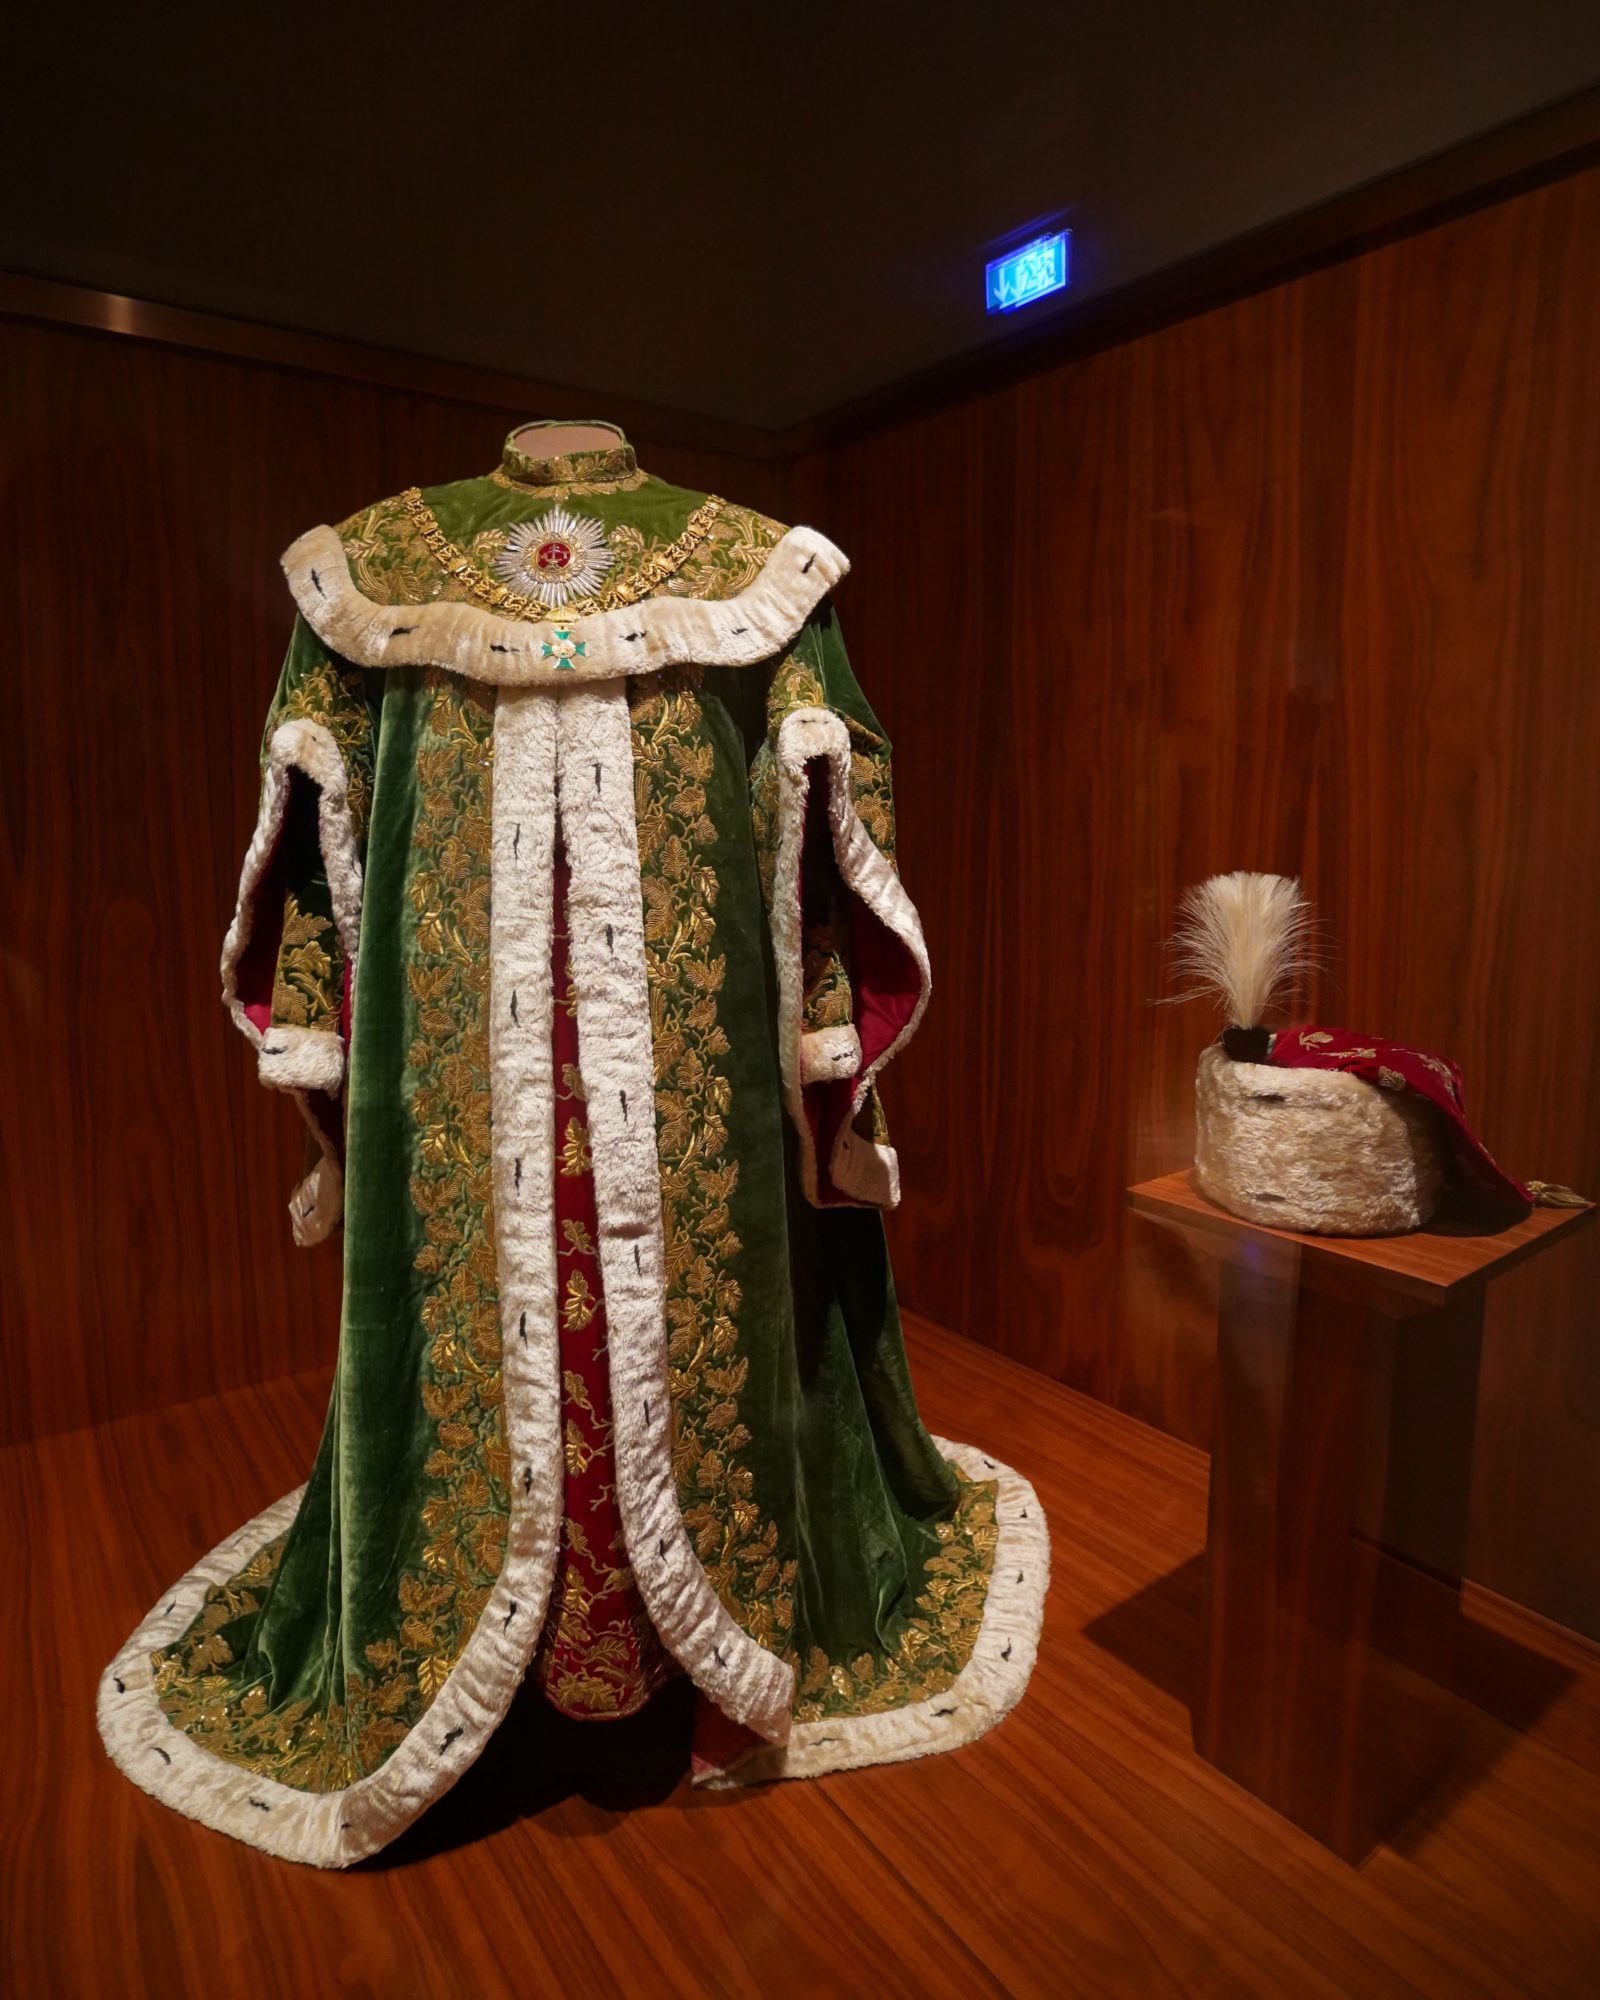 A full-length robe of office, green and gold and lined with white ermine; a plumed hat is on a stand nearby